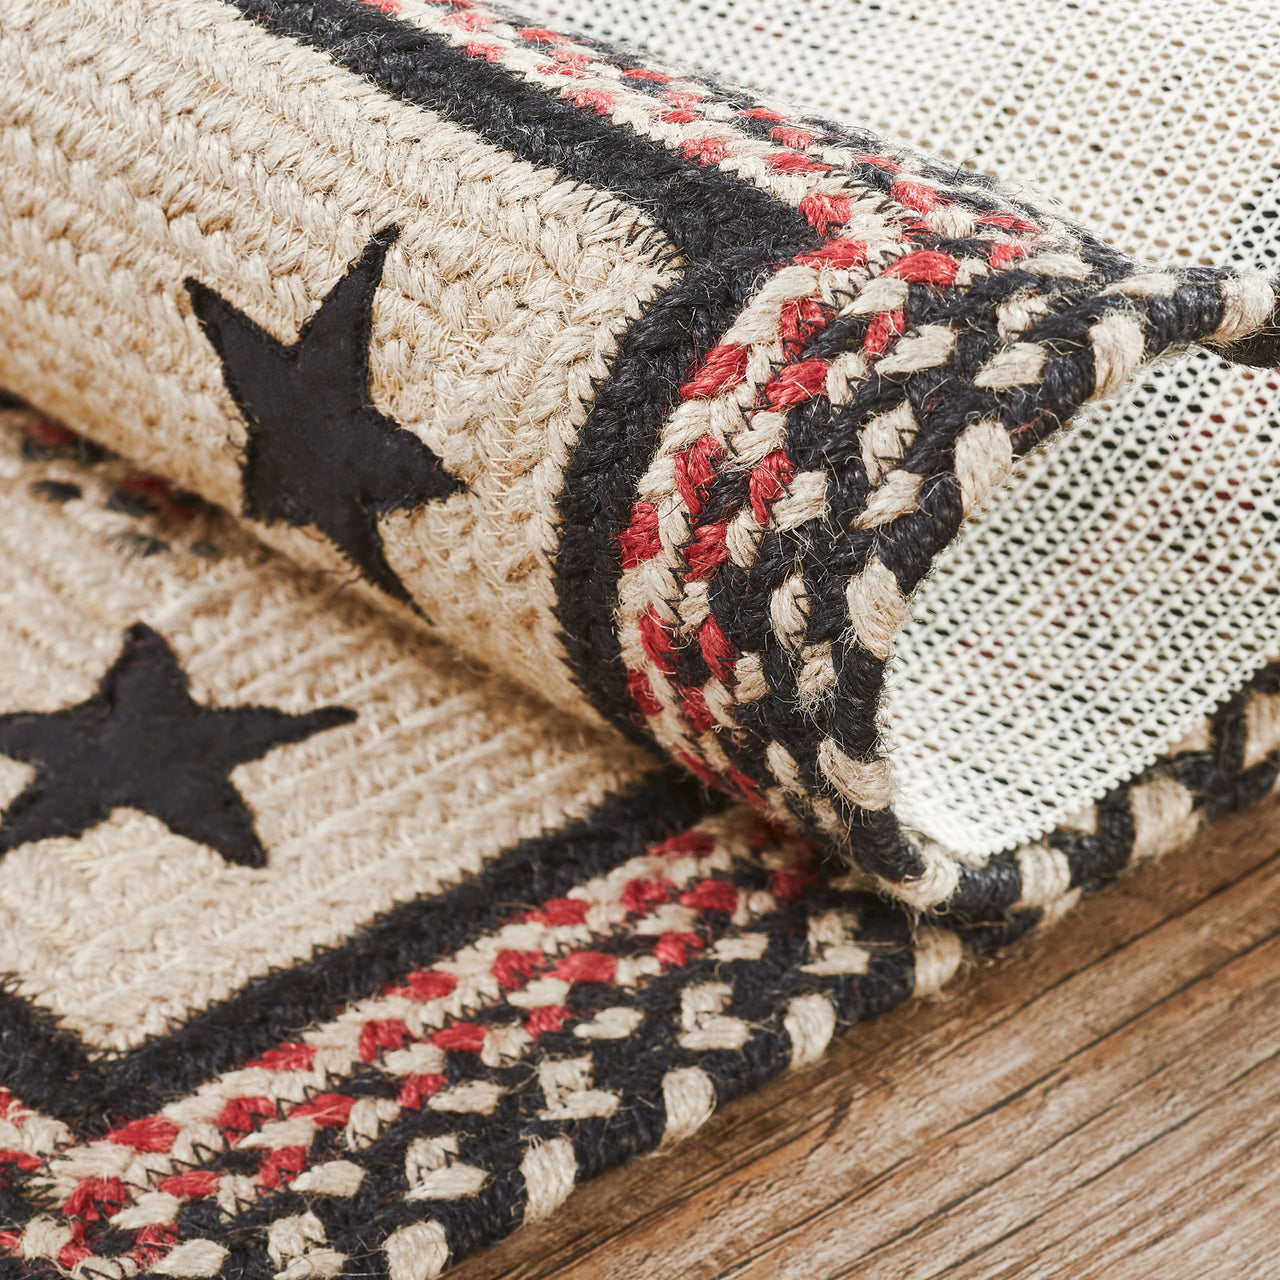 Colonial Star Jute Braided Rug Rect. with Rug Pad 2'x3' VHC Brands